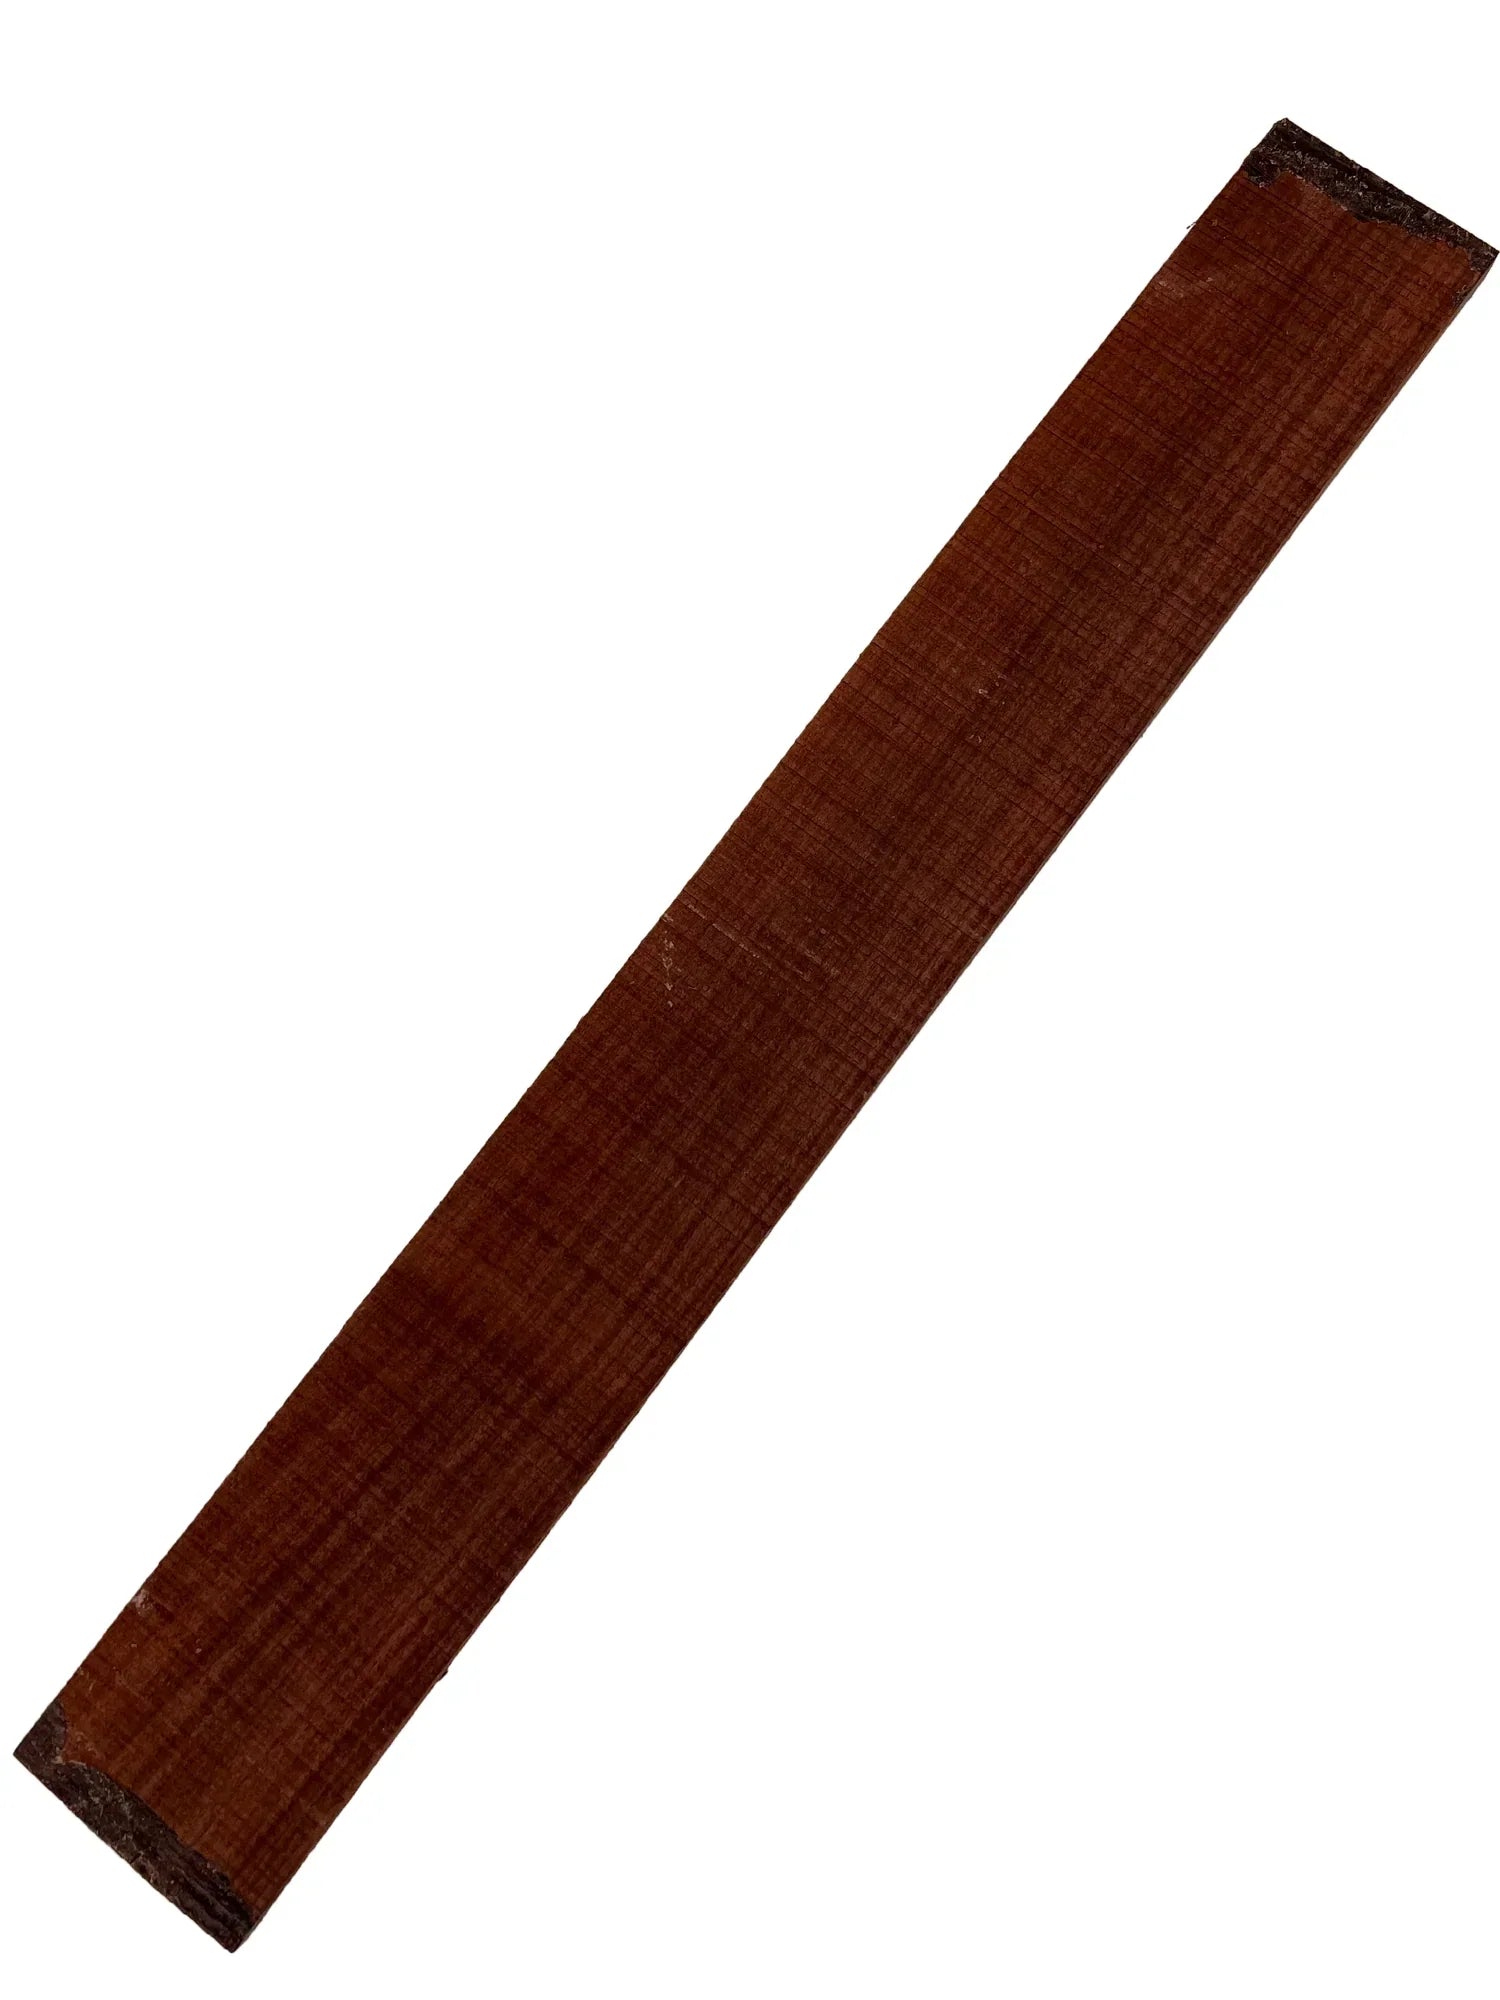 2 Pack, East Indian Rosewood Guitar Fingerboard Blanks 21&quot; x 2-3/4&quot; x 3/8&quot; - Exotic Wood Zone - Buy online Across USA 